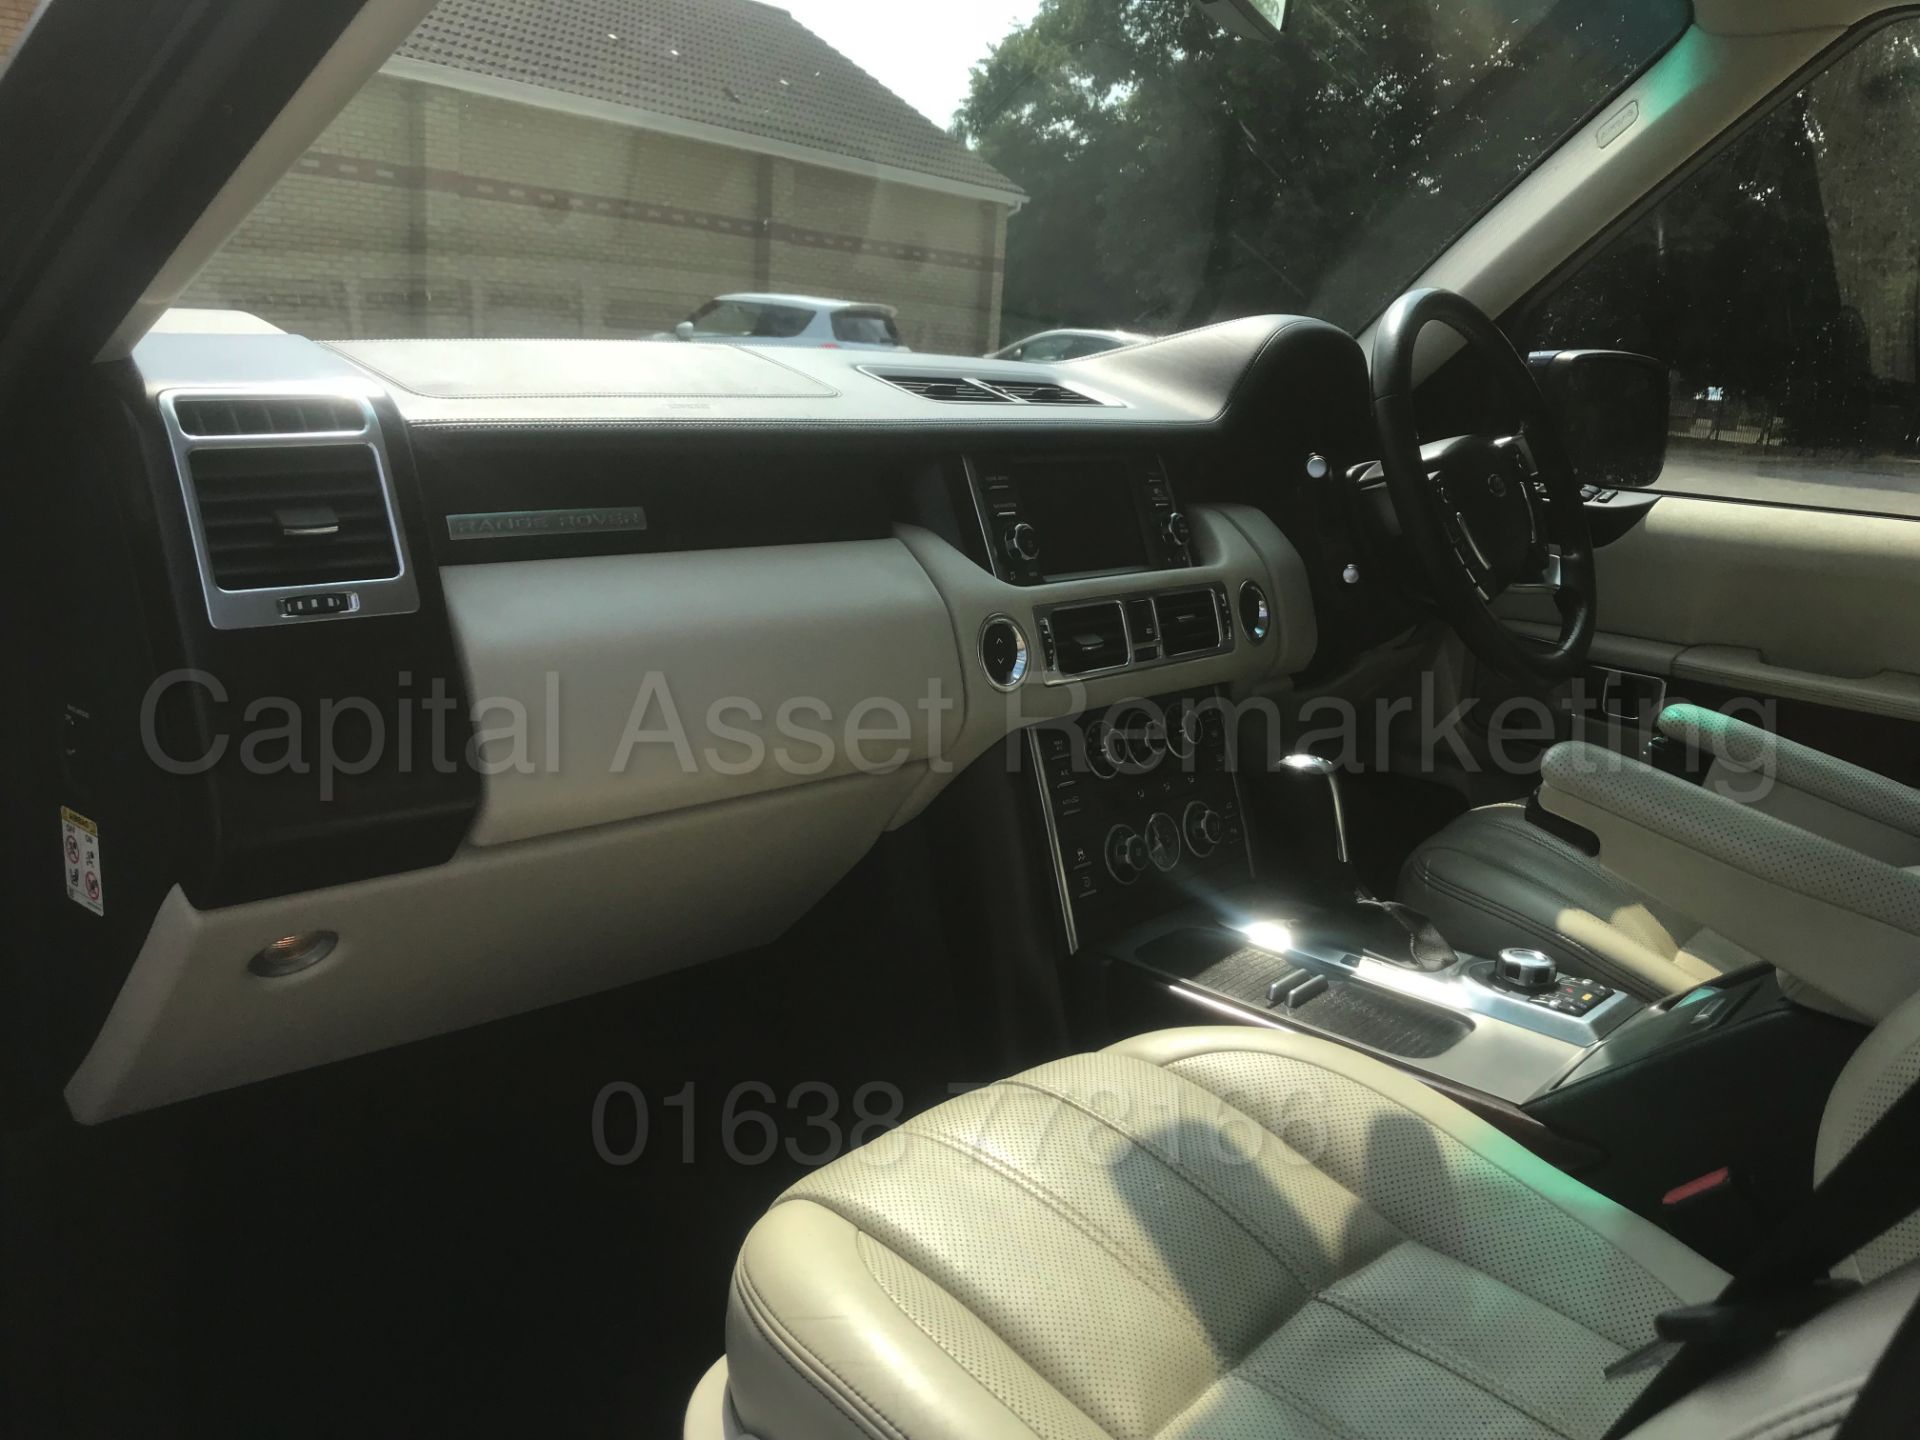 (On Sale) RANGE ROVER VOGUE **SE EDITION** (2010 - FACELIFT EDITION) 'TDV8 - 268 BHP - AUTO' **WOW** - Image 26 of 62